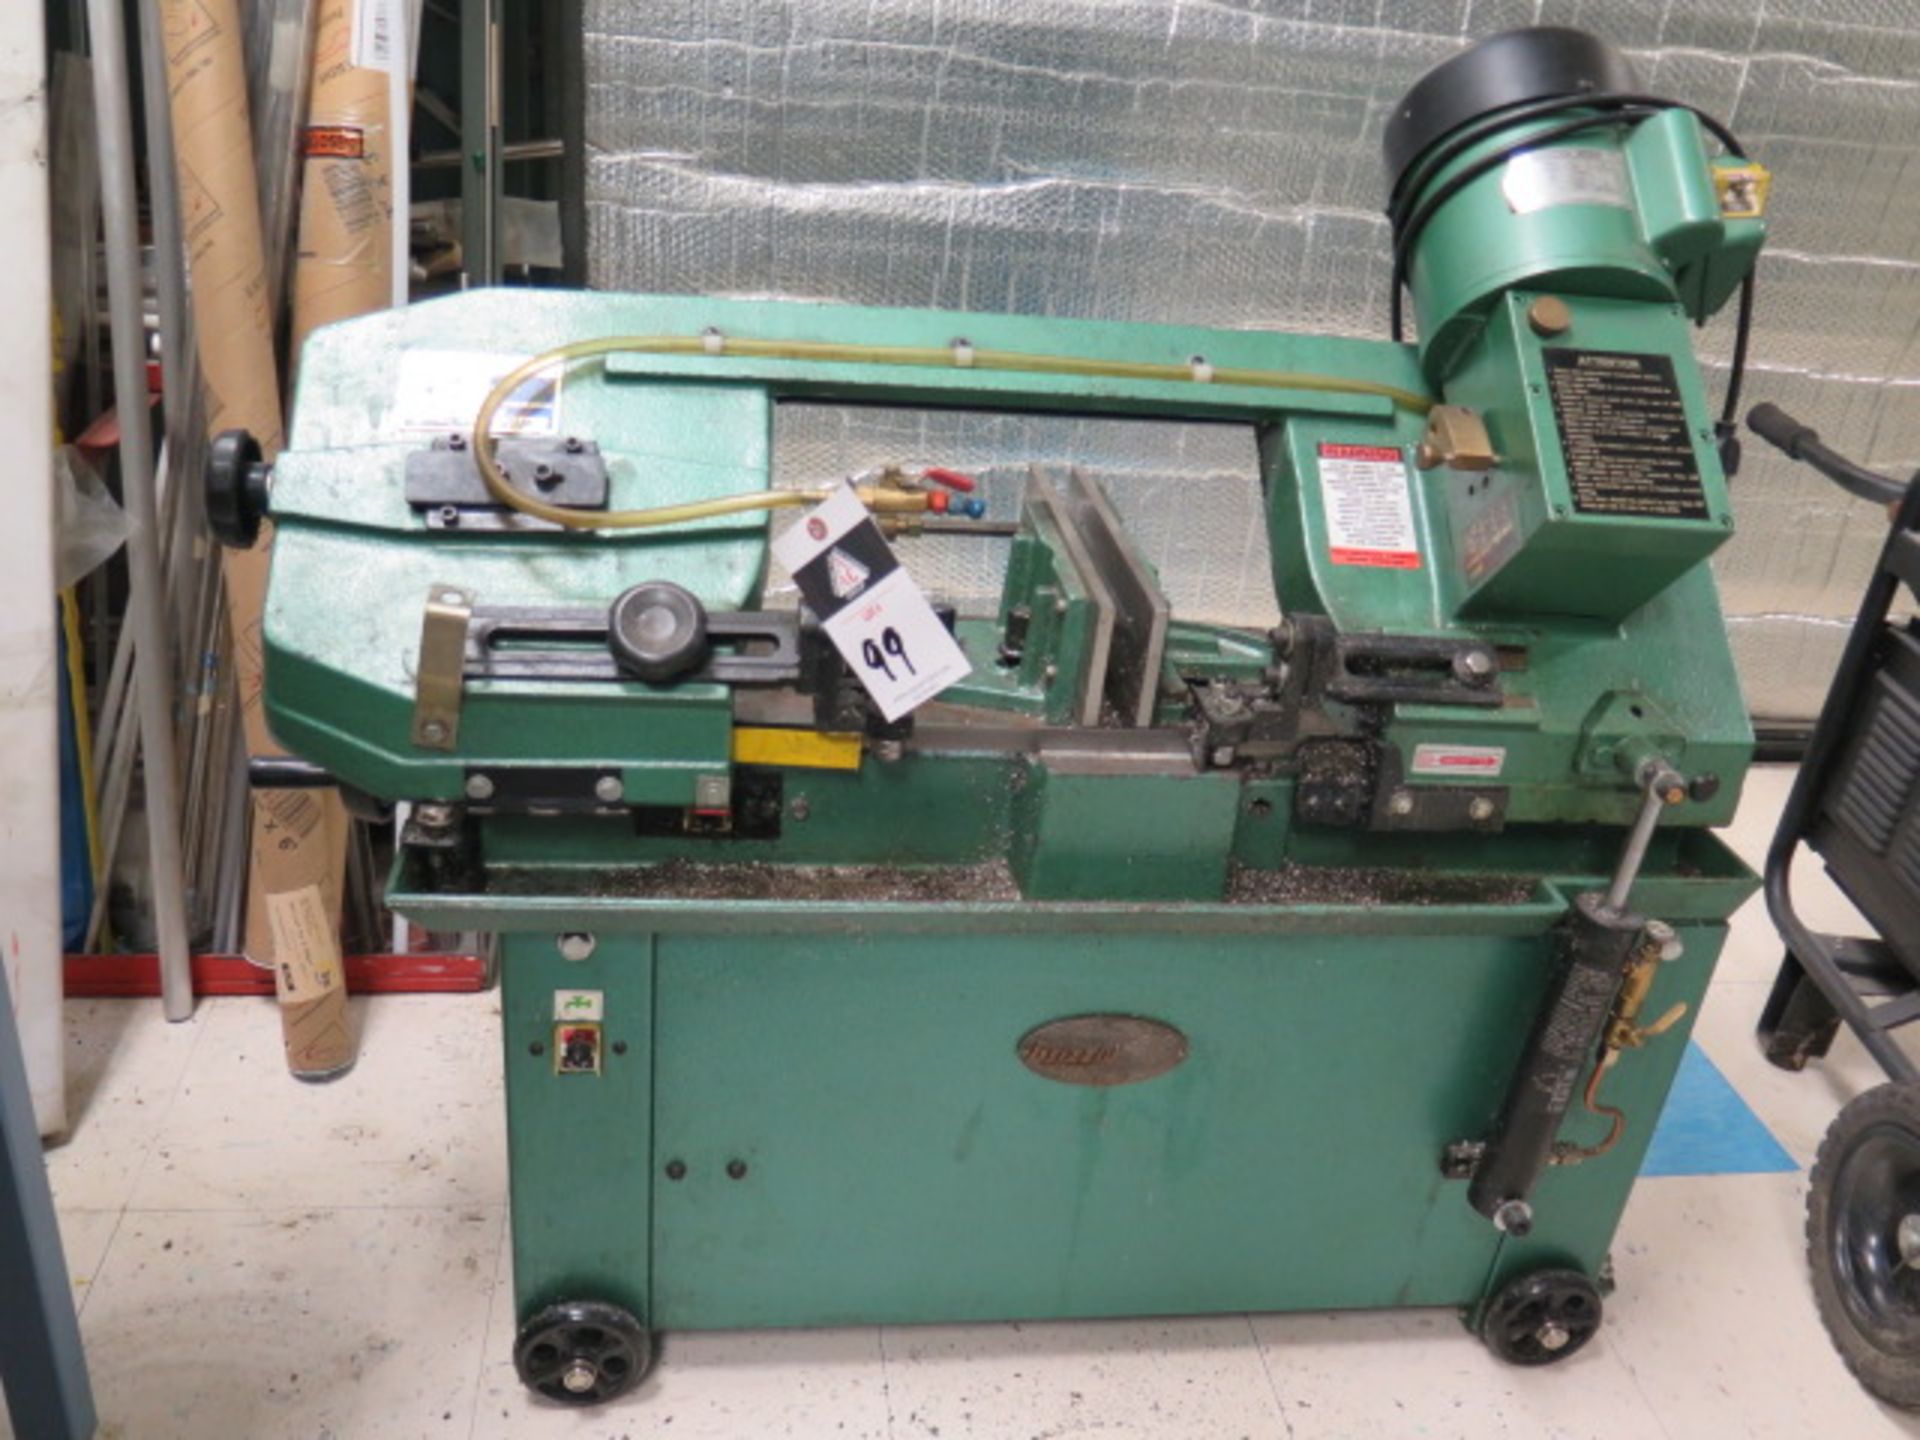 Grizzly mdl. G4043 6 ½” Horizontal Band Saw s/n 7288 w/ Manual Clamping, Coolant (SOLD AS-IS - NO WA - Image 3 of 8